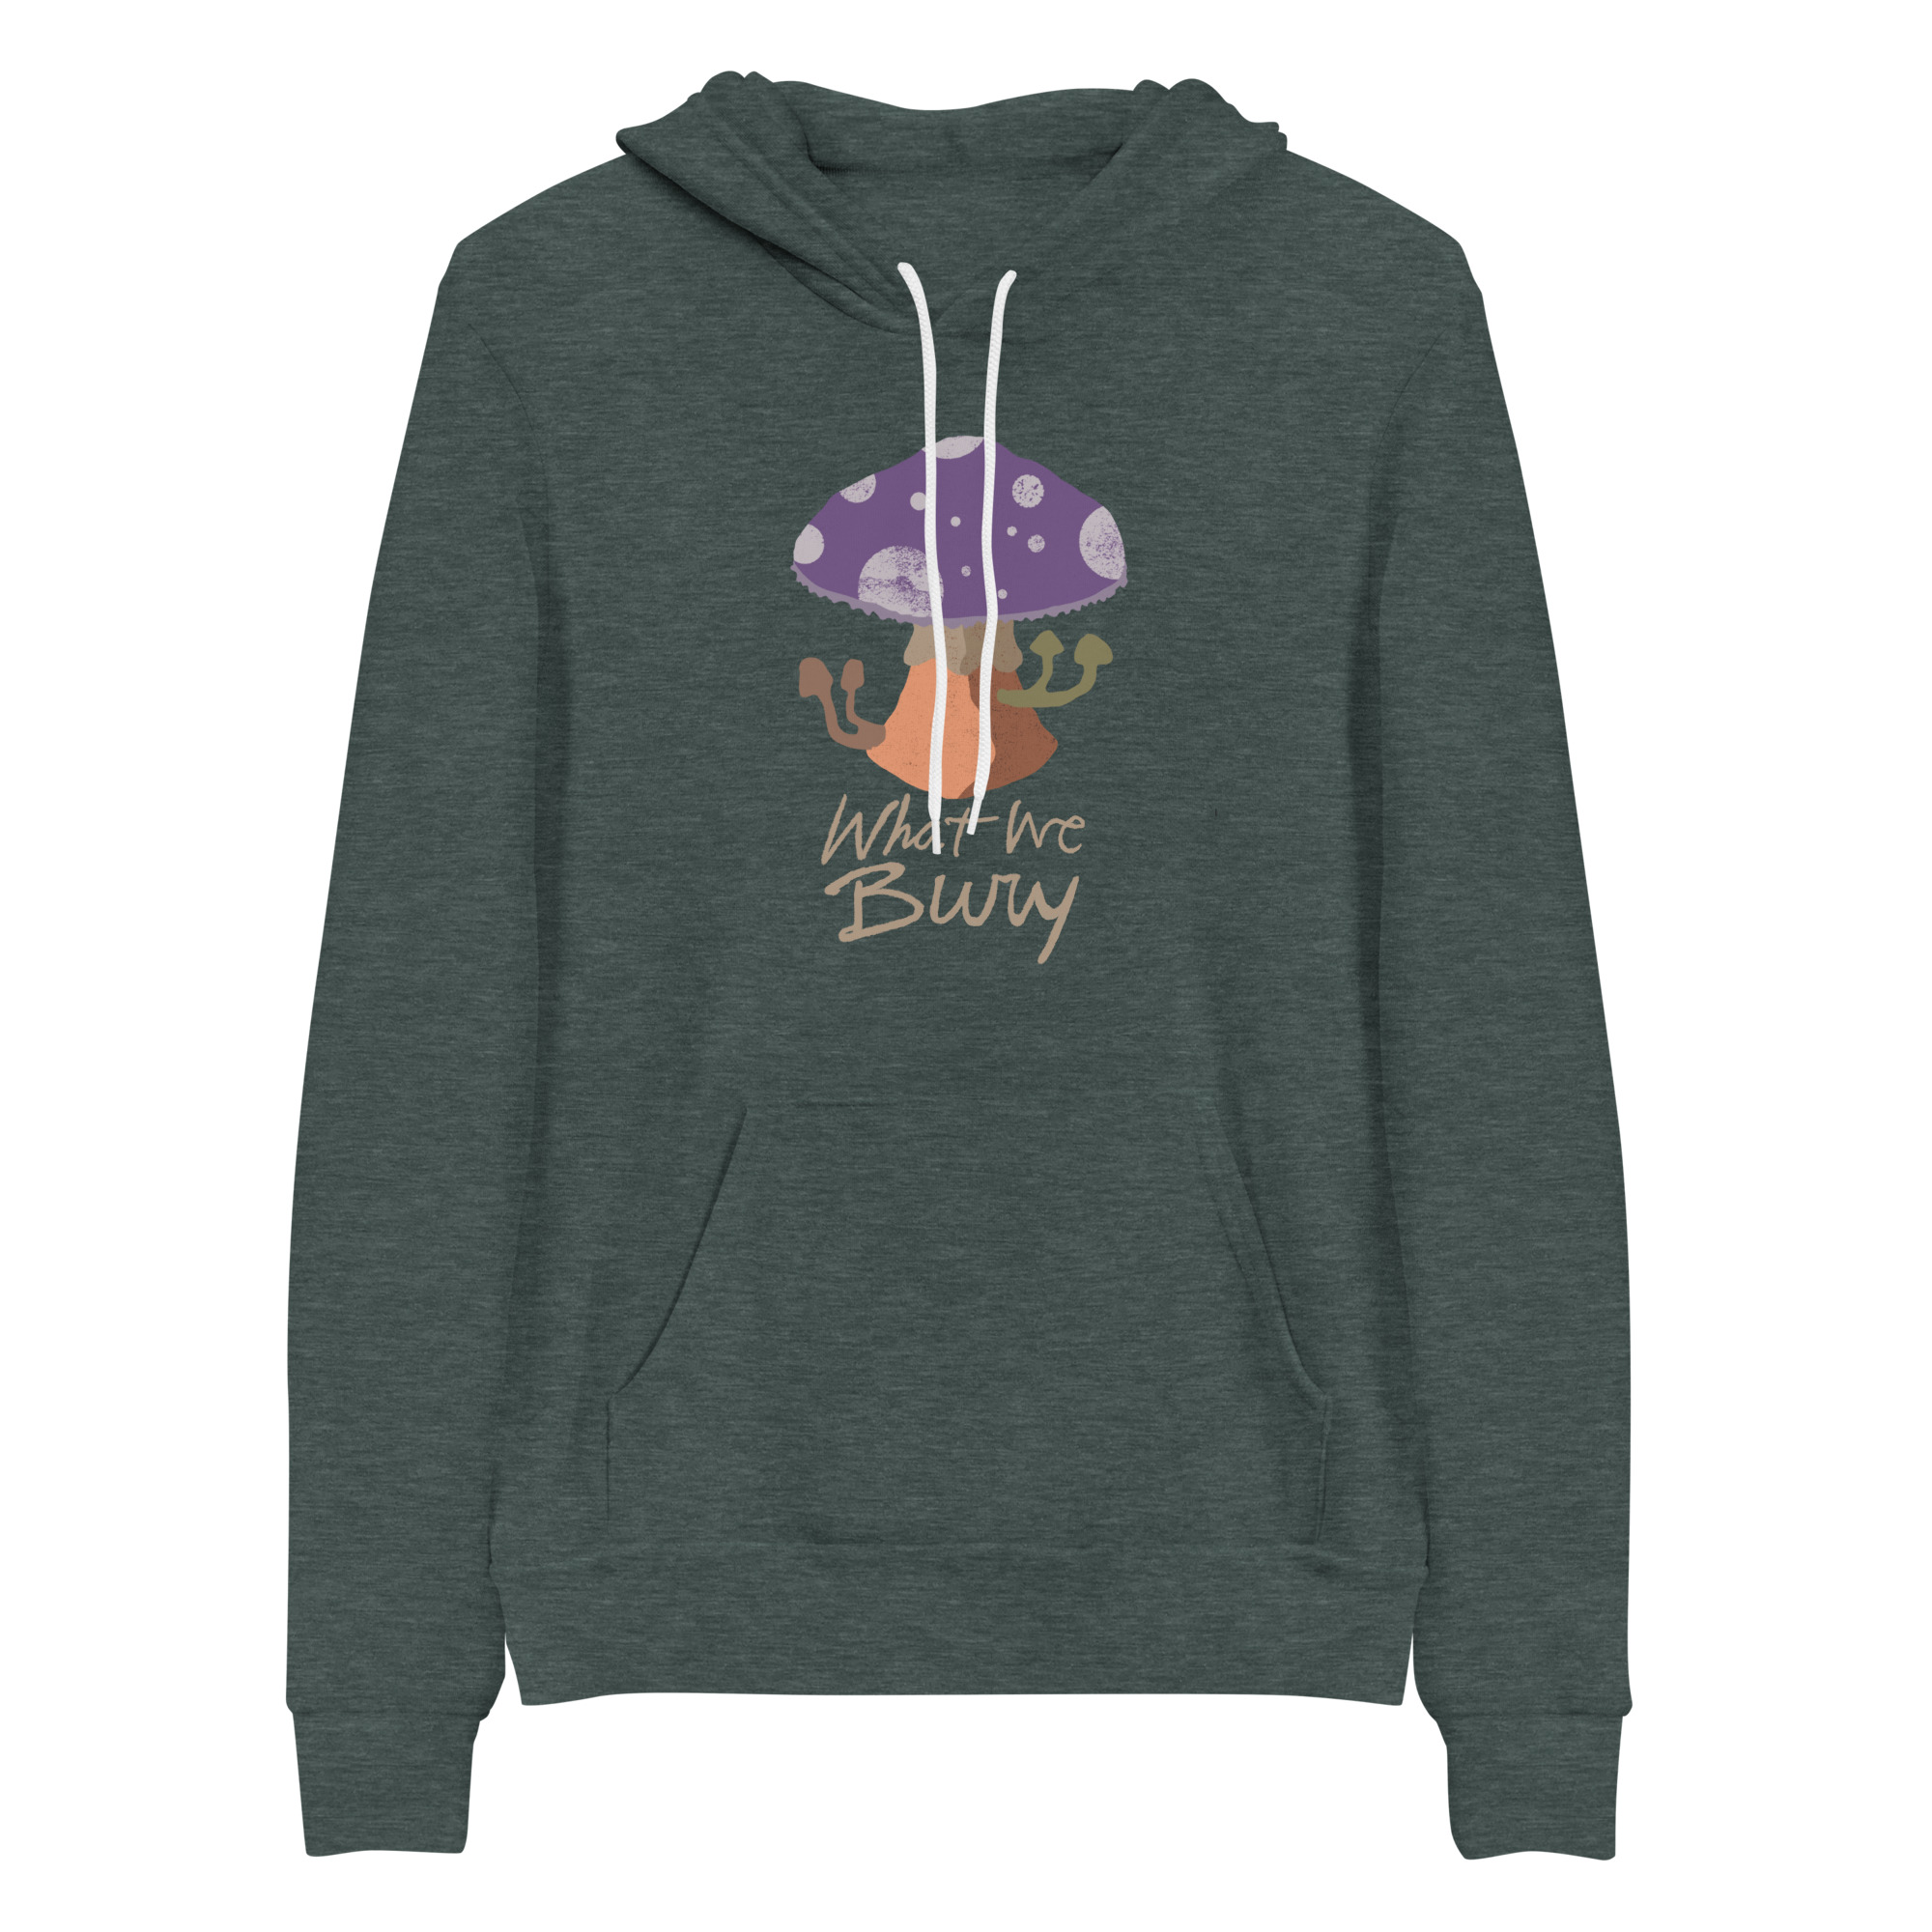 Heather forest green hoodie featuring a purple toadstool mushroom with four smaller mushrooms budding from the stipe. Text underneath reads "What We Bury."